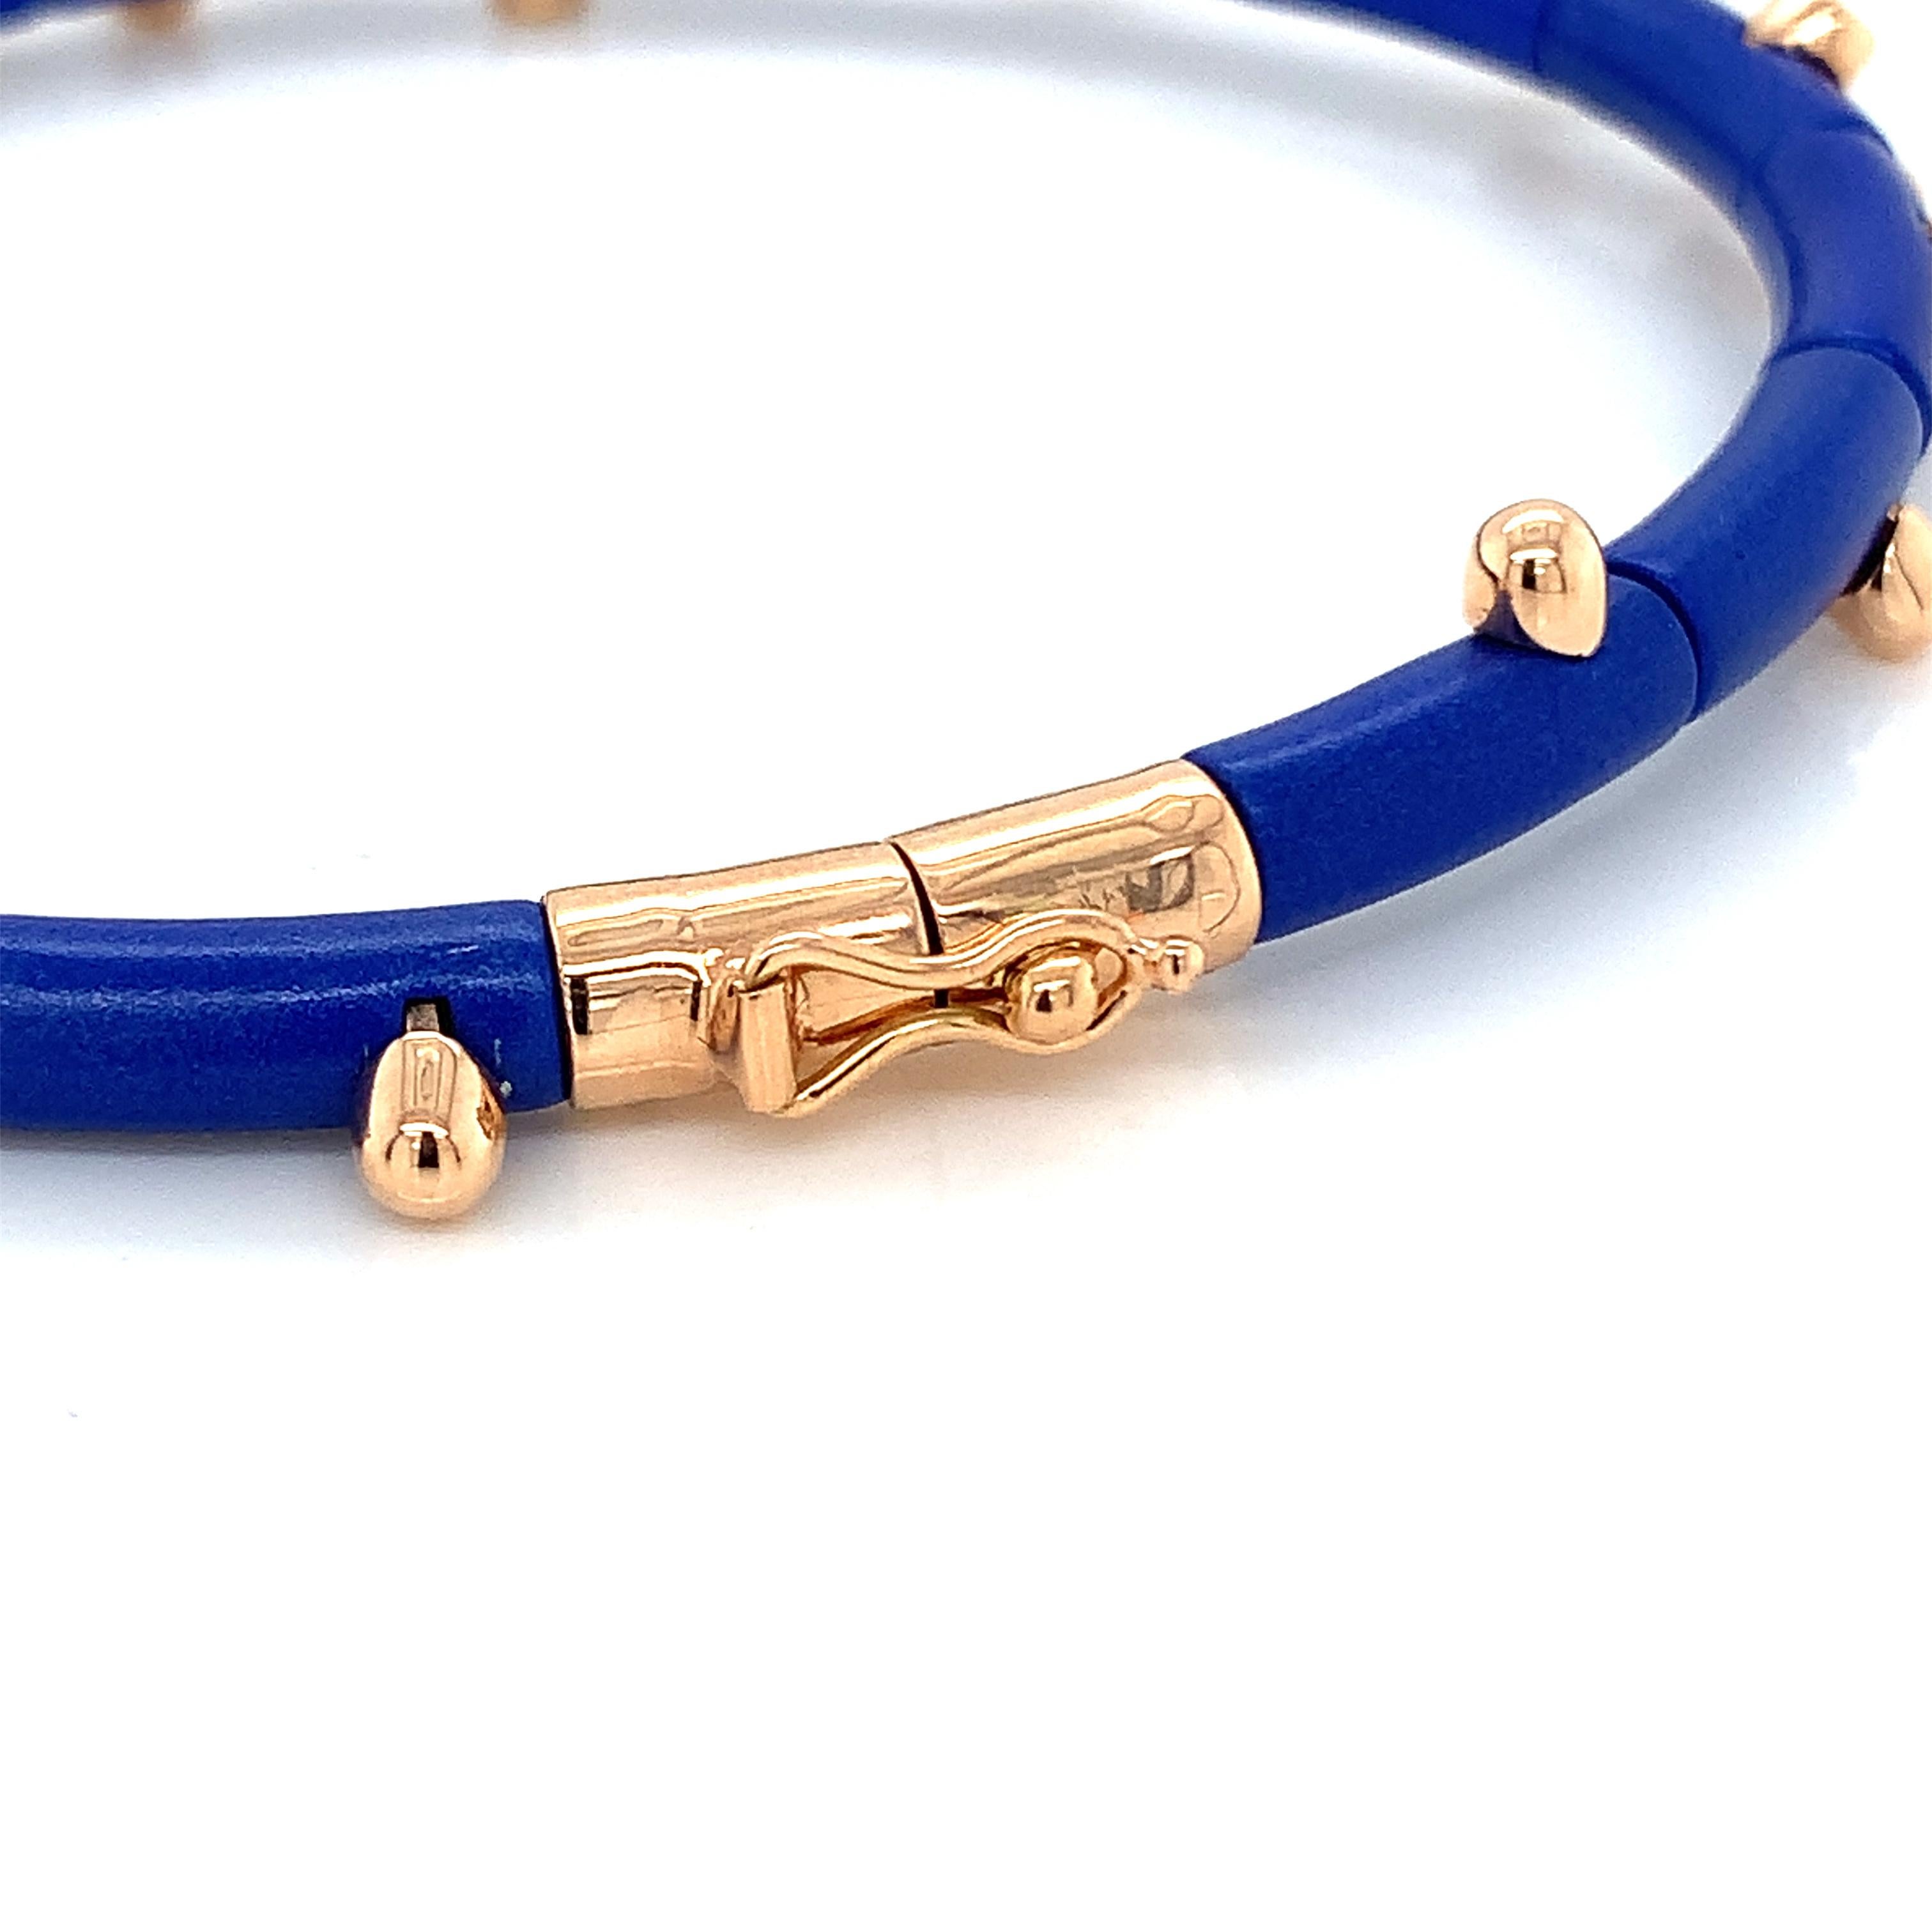 Experience luxurious detail and sophisticated style with our Blue Cactus Bracelet.
This timeless accessory features blue aluminum and rose gold elegantly set with white diamonds and emeralds.
Enjoy a secure fit and a timeless design with the